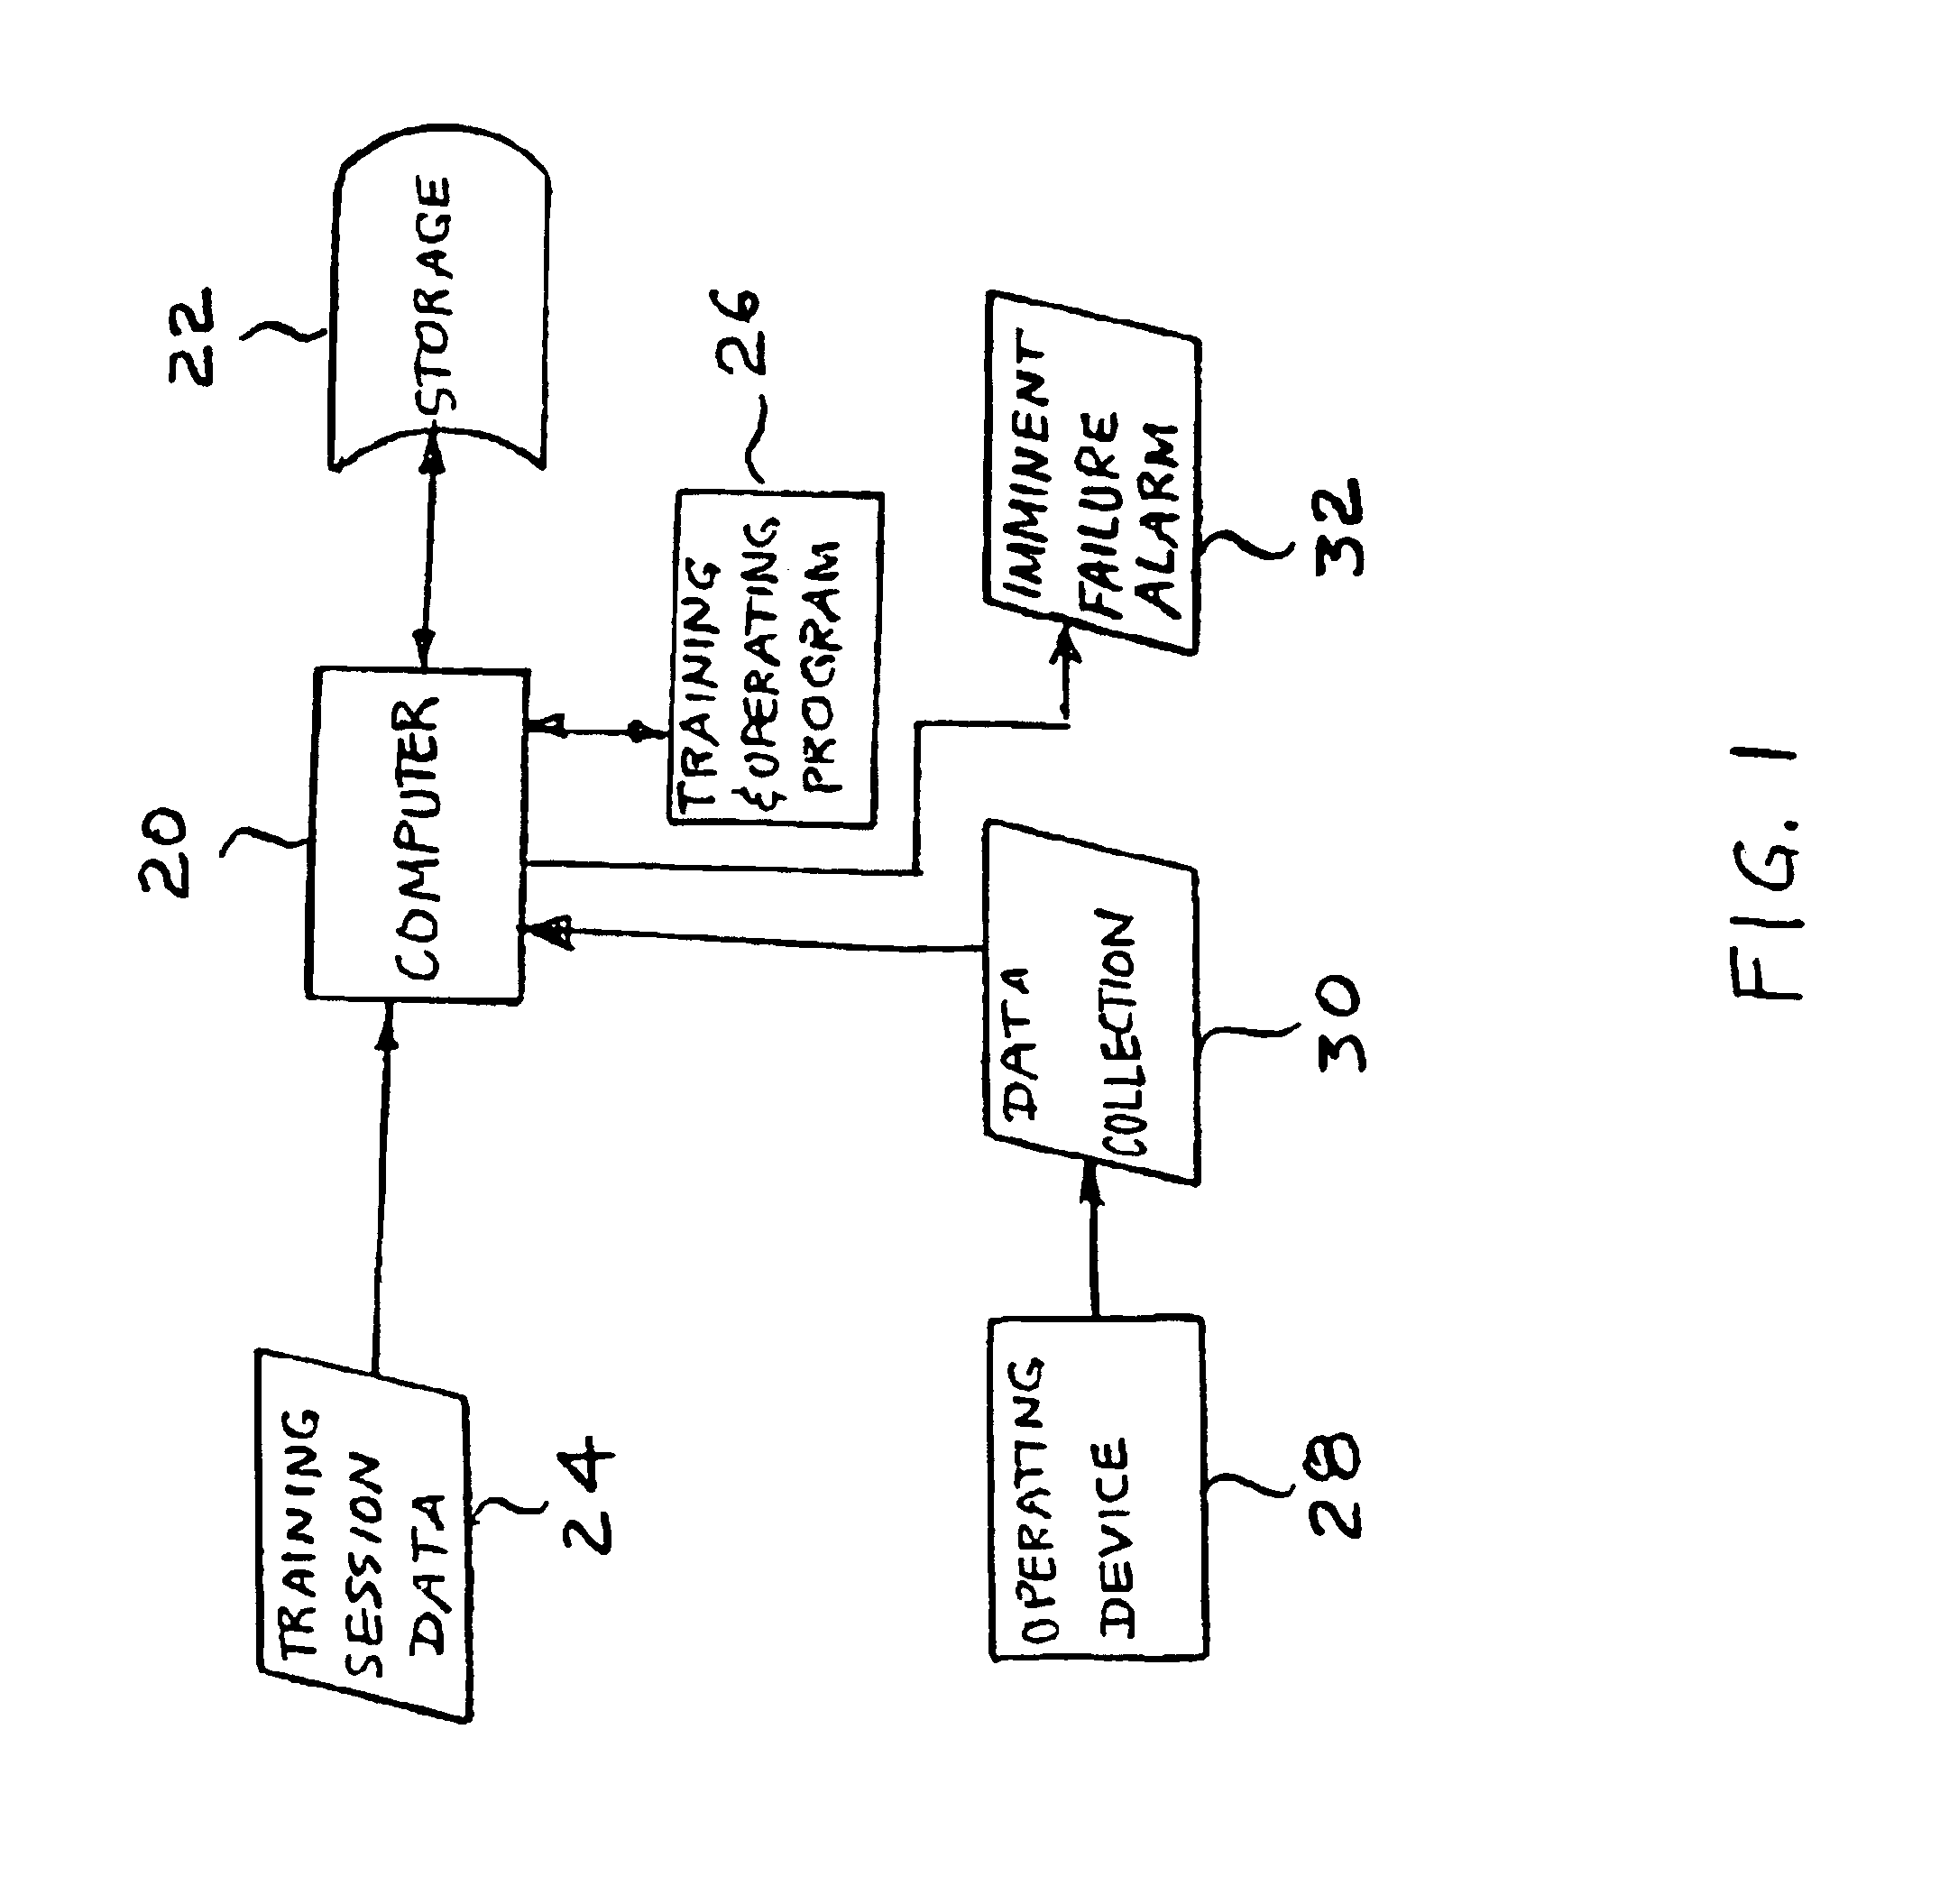 Method and apparatus for providing predictive maintenance of a device by using markov transition probabilities